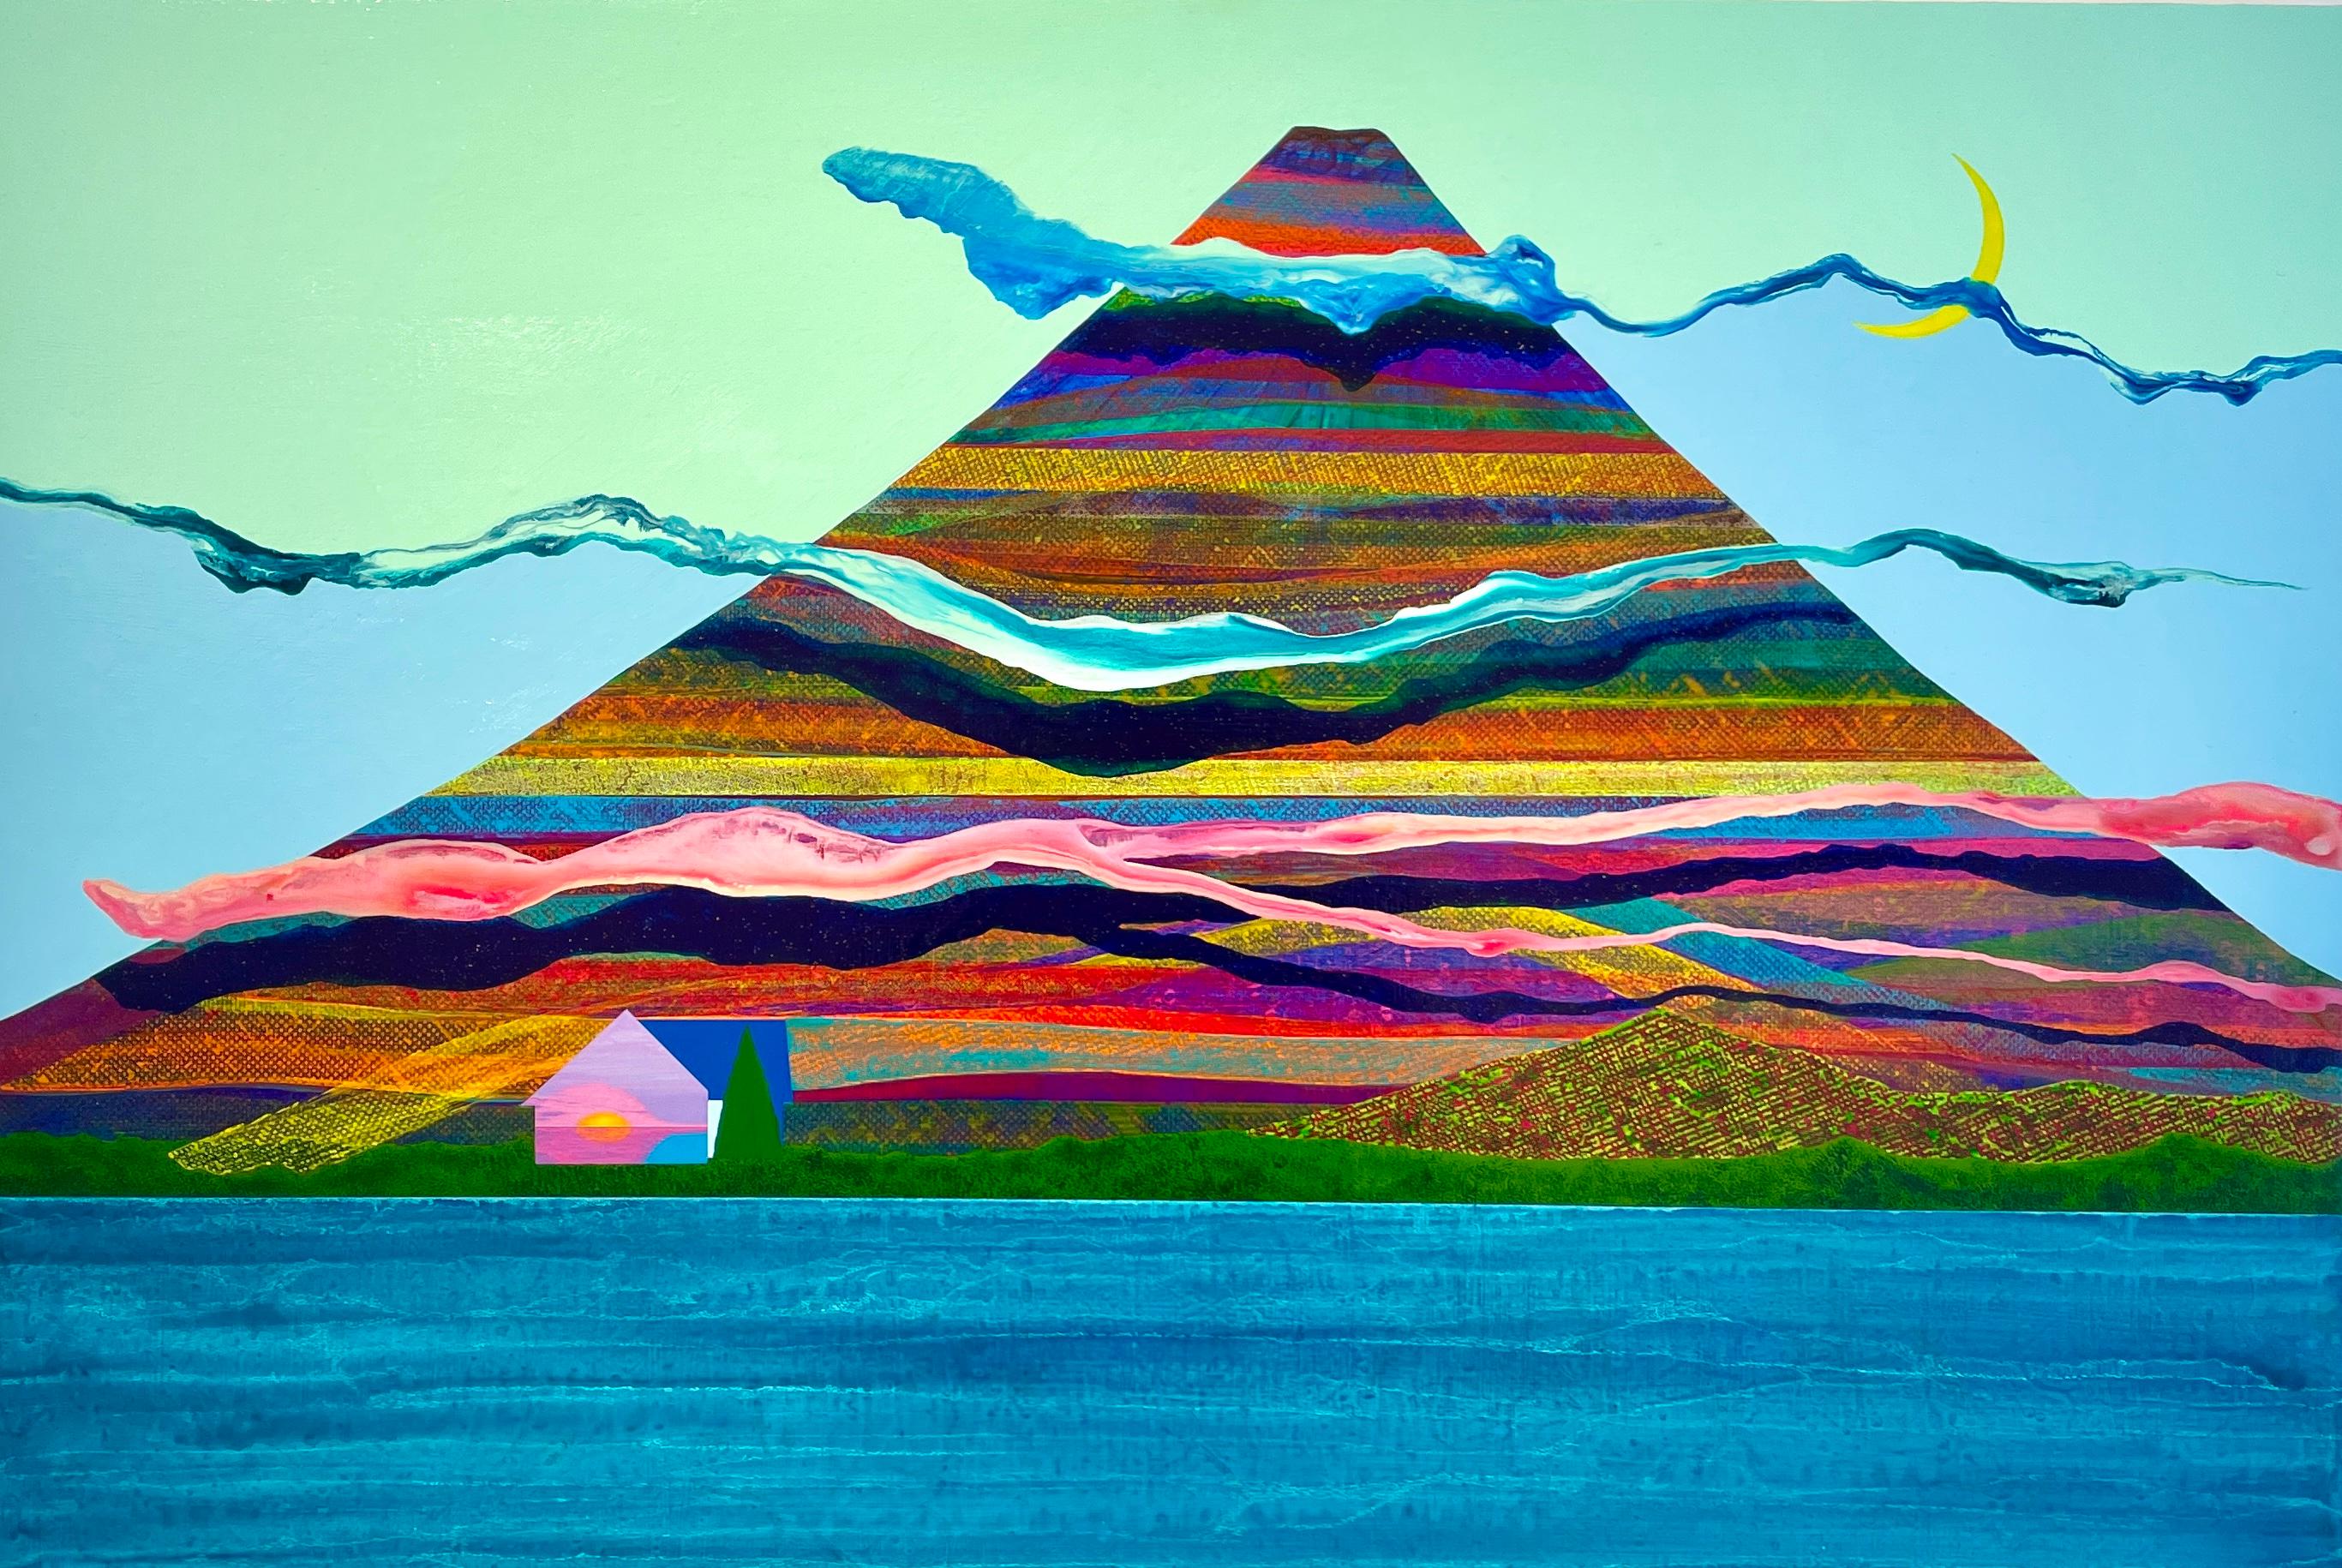 James Isherwood Figurative Painting - Empyrean, bright surrealistic painting of house against mountain, neon colors